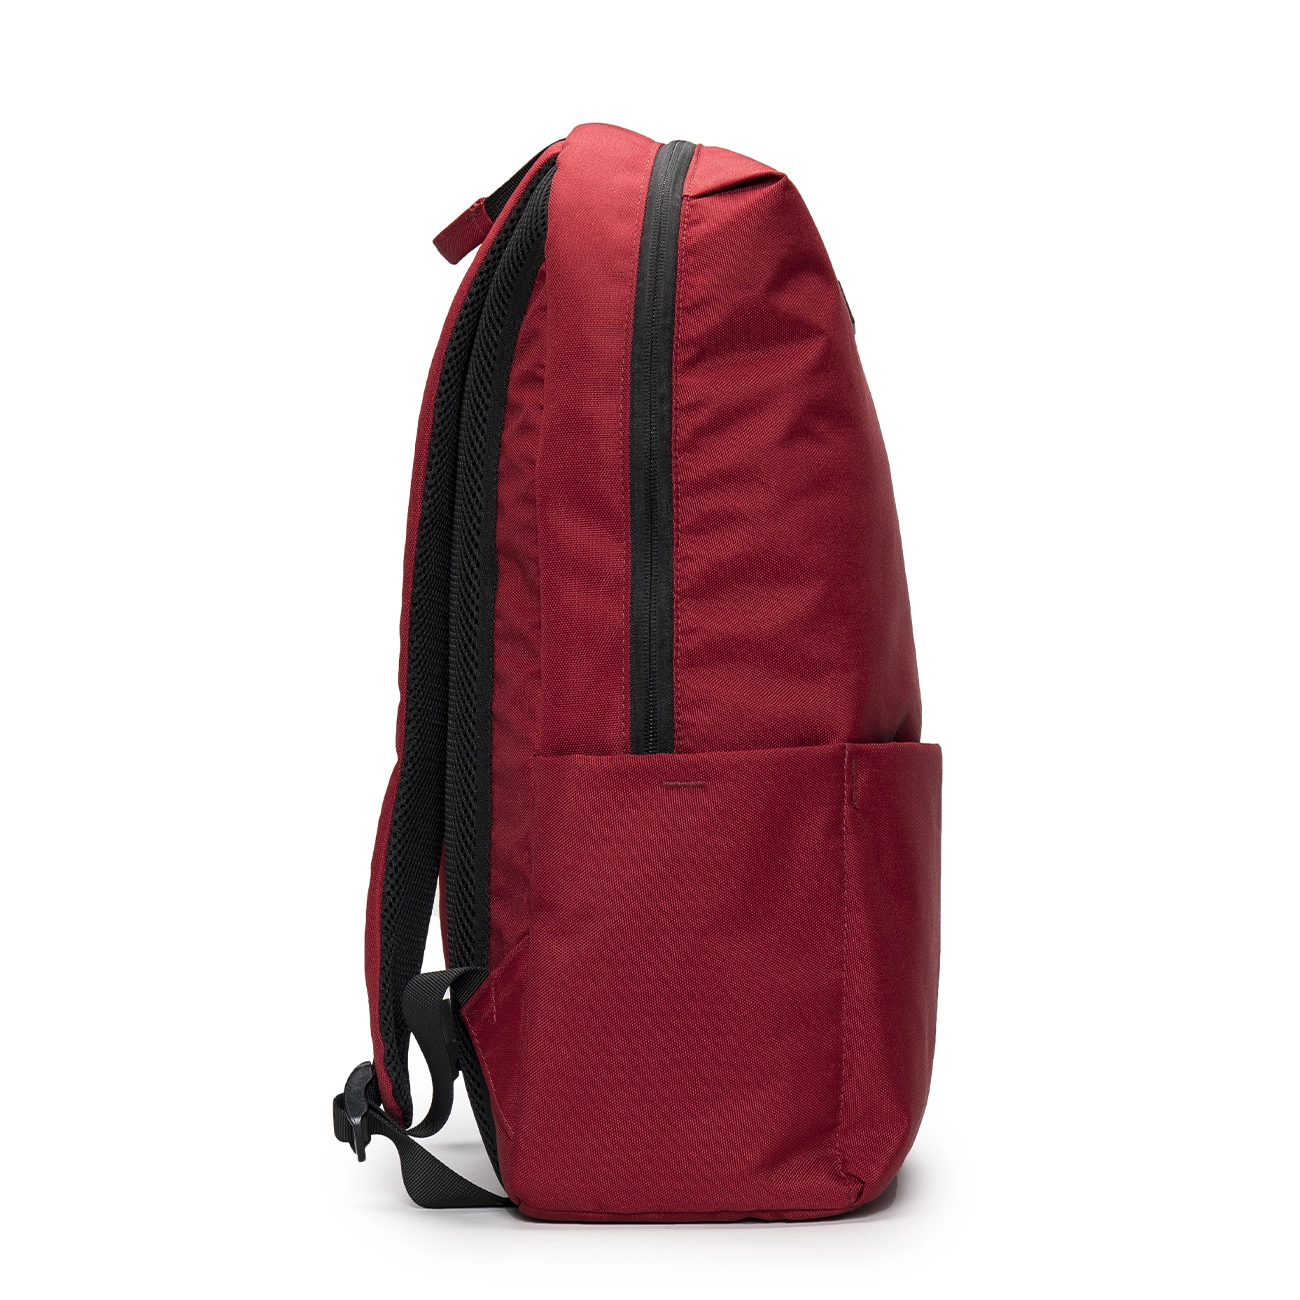 recycled material backpack